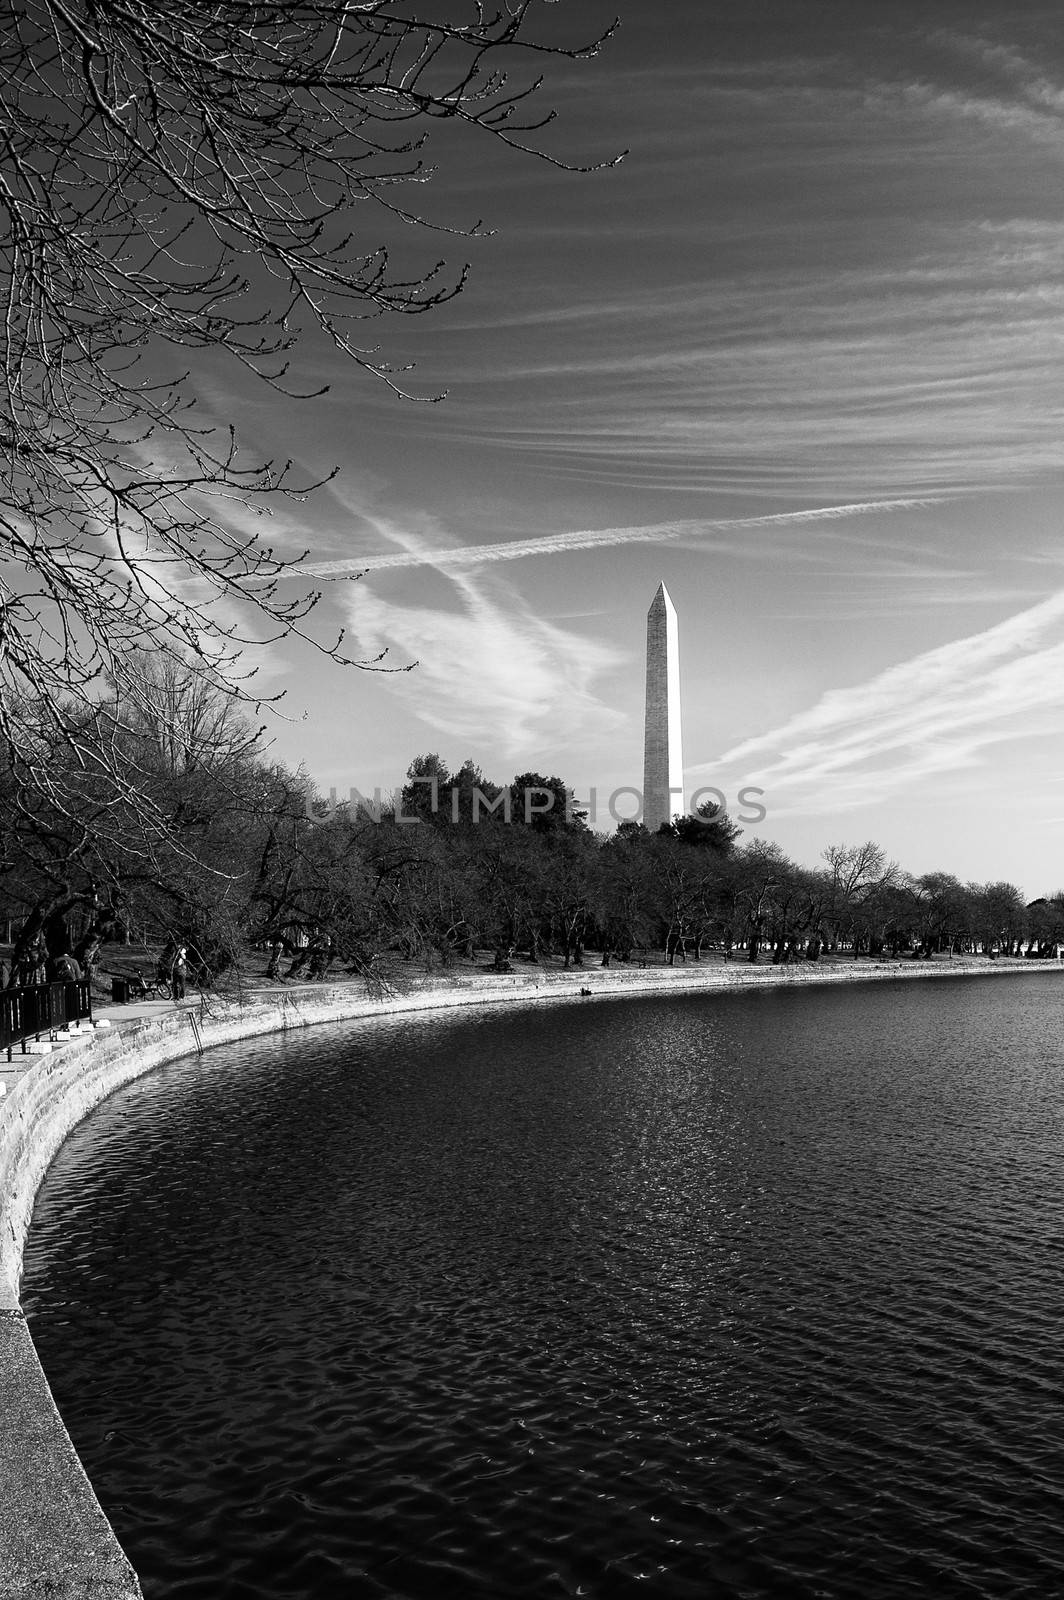 The Washington monument and Potomac River tidal basin in black and white.